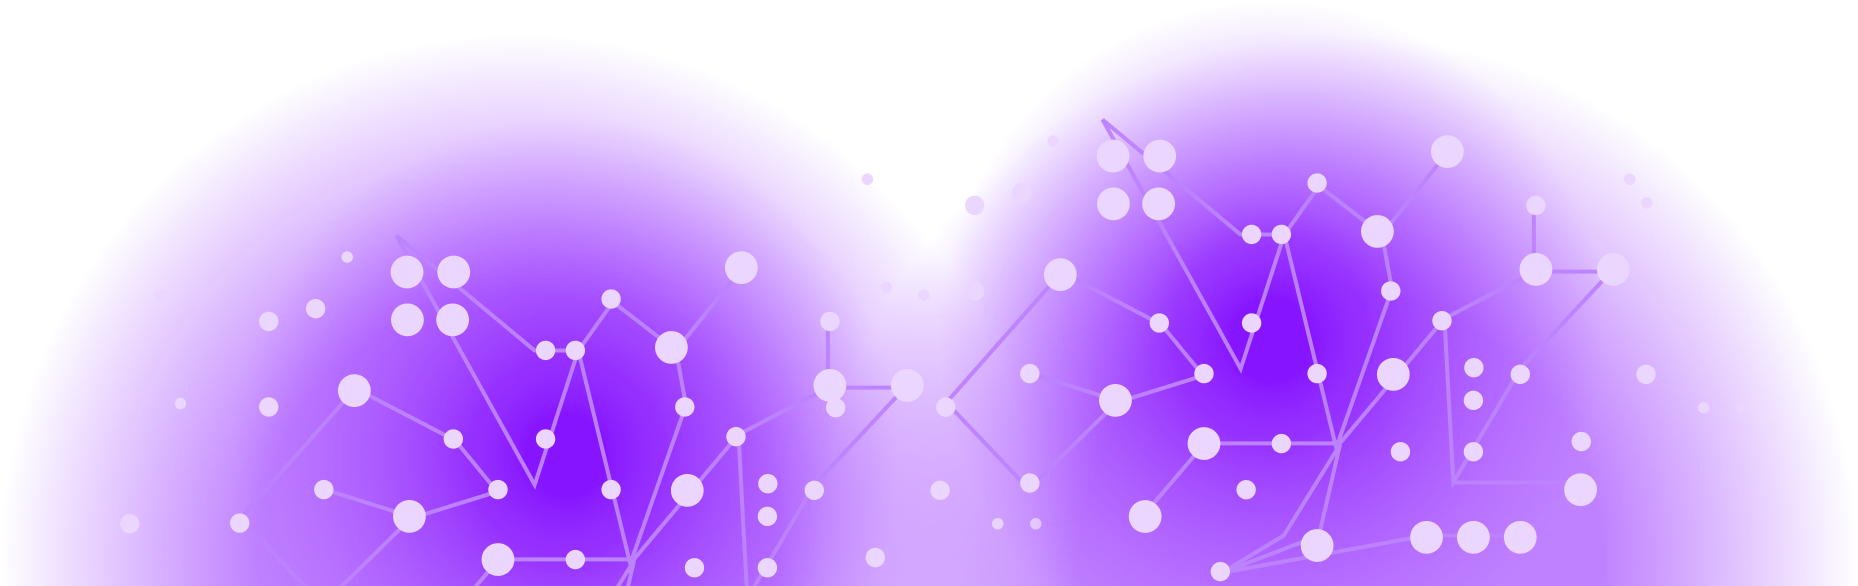 A network of white dots and lines on a purple background representing Knowledge Graph.